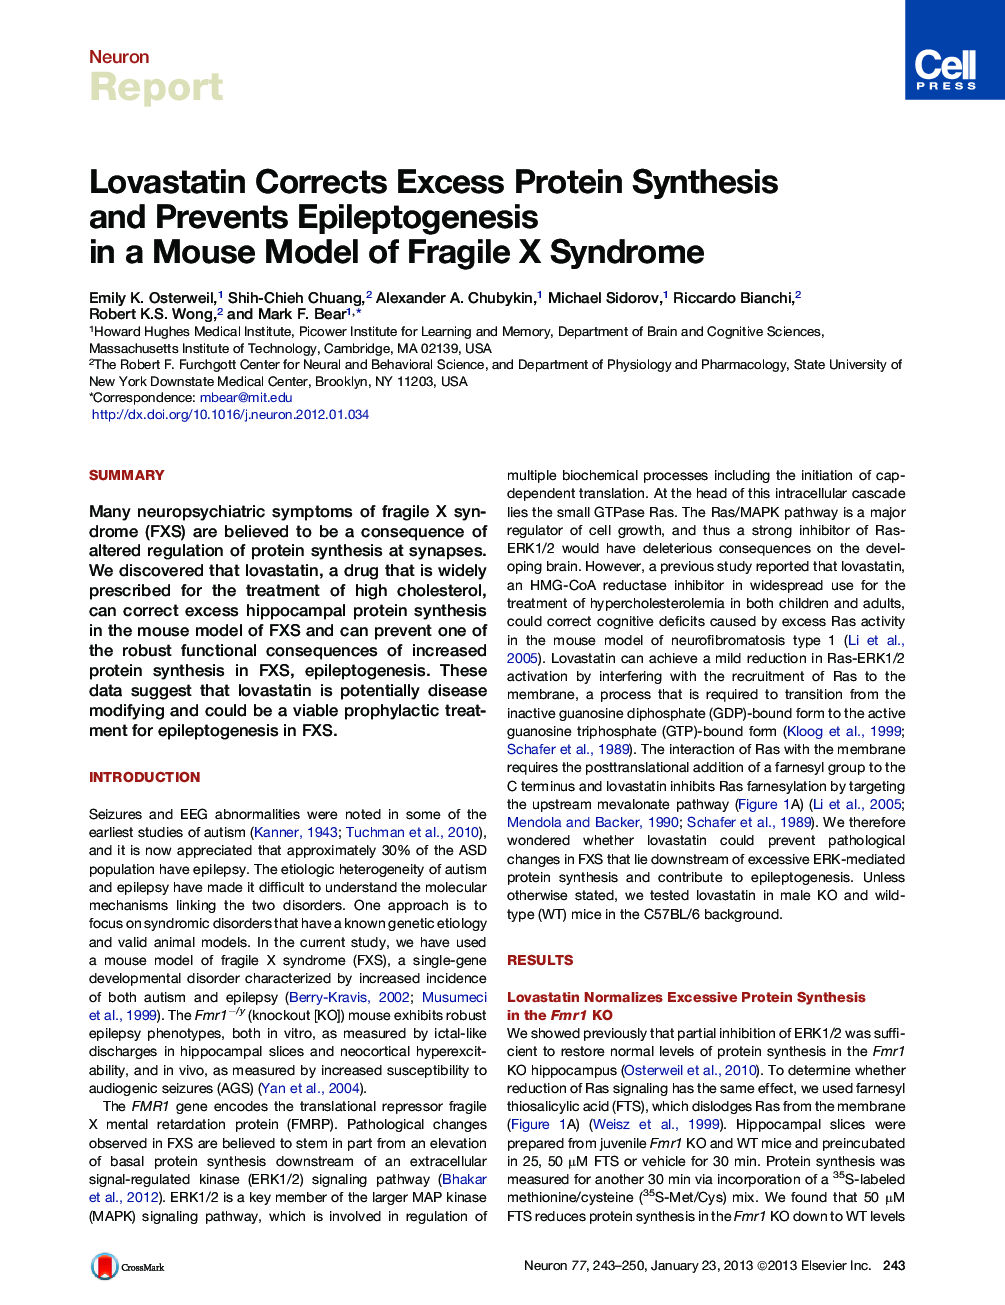 Lovastatin Corrects Excess Protein Synthesis and Prevents Epileptogenesis in a Mouse Model of Fragile X Syndrome